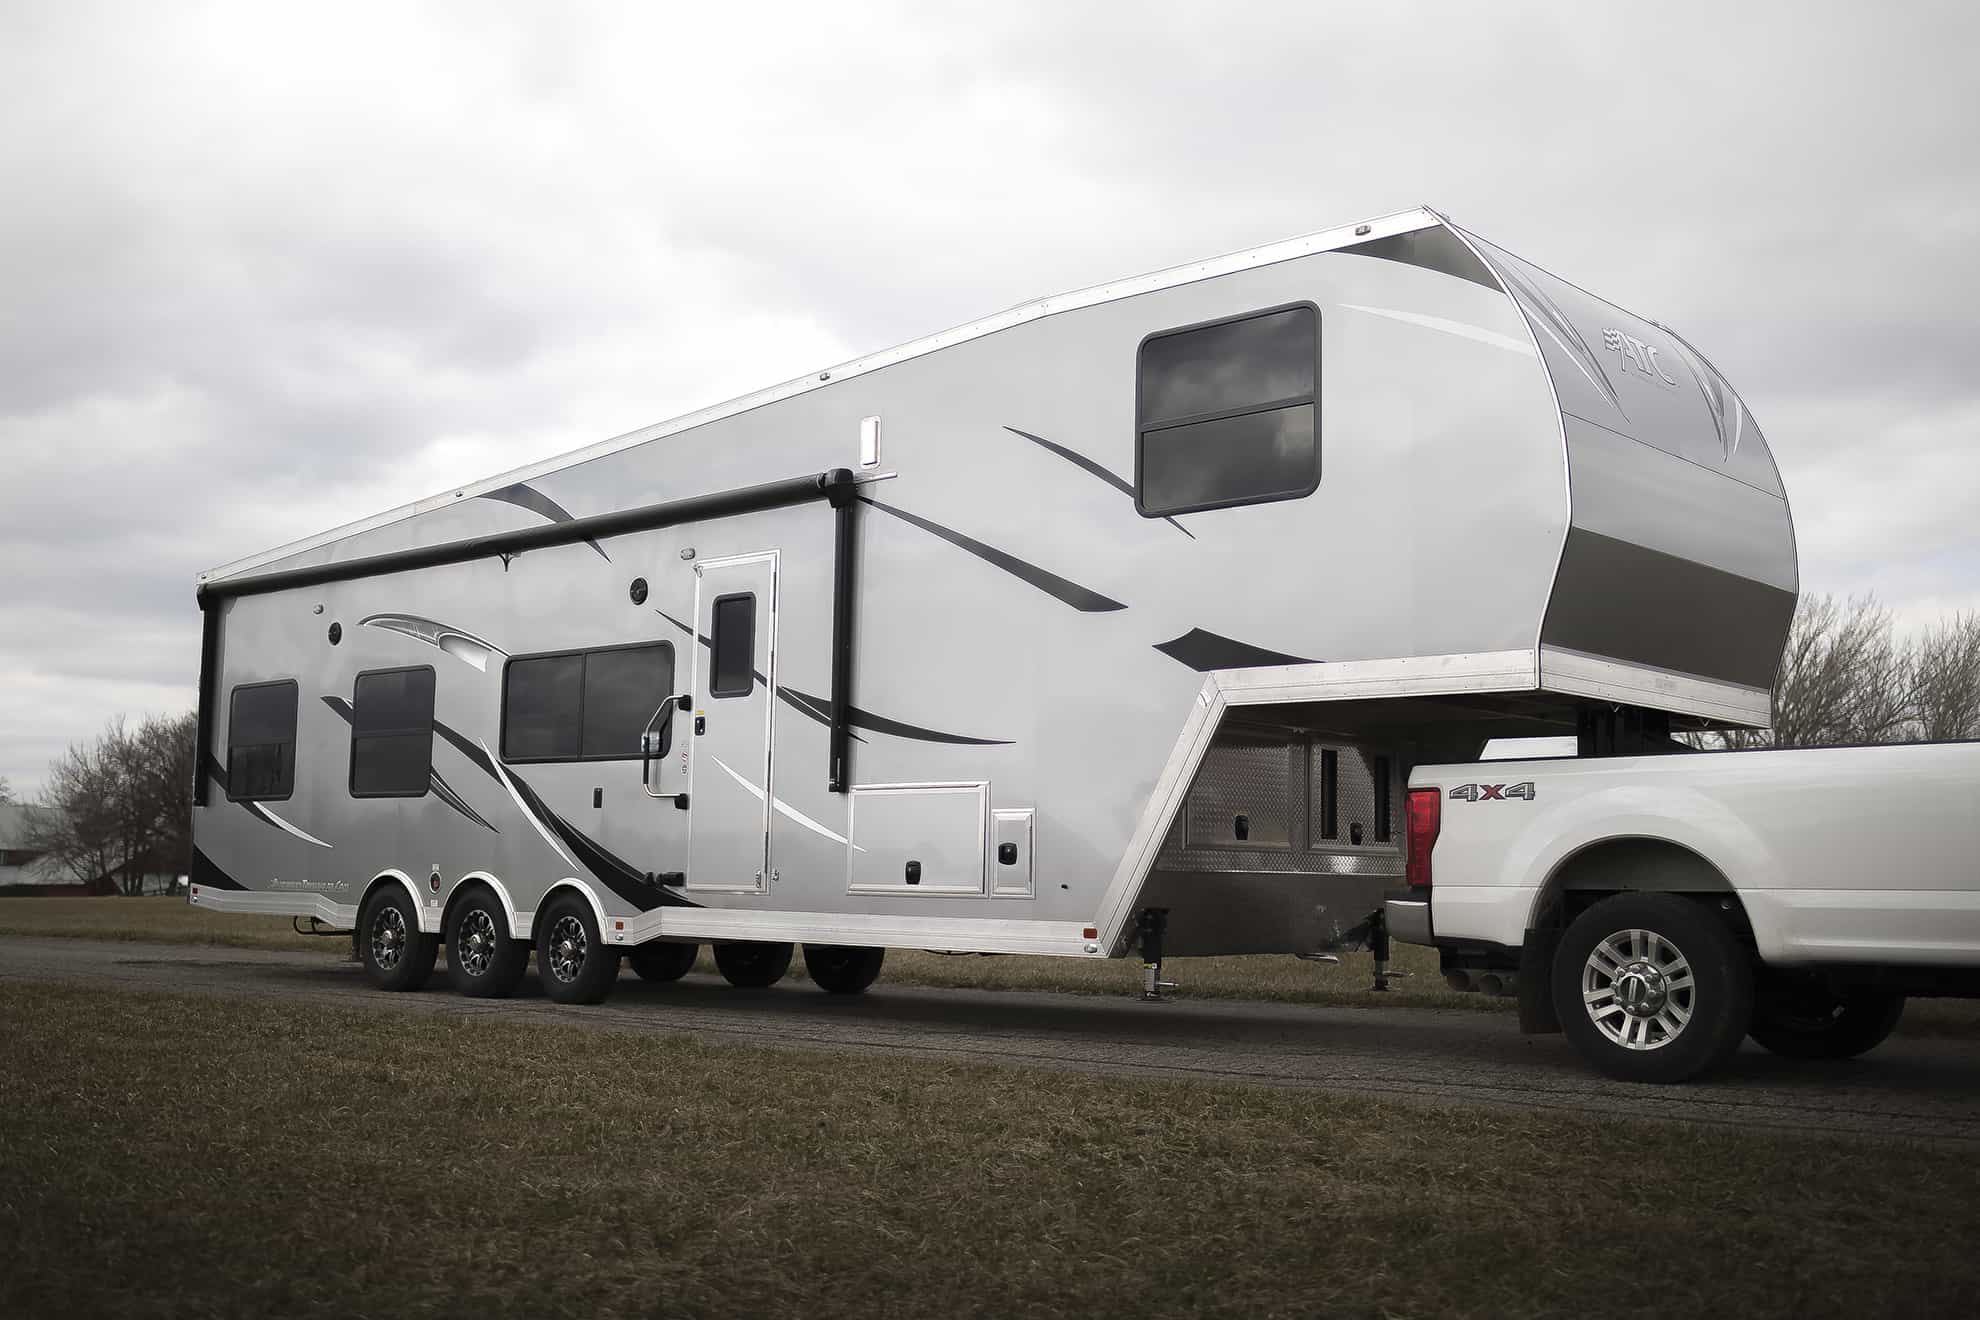 The 10 Best Fifth Wheel Toy Haulers For Full-Timing Best 5th Wheel Toy Hauler Under 35 Feet